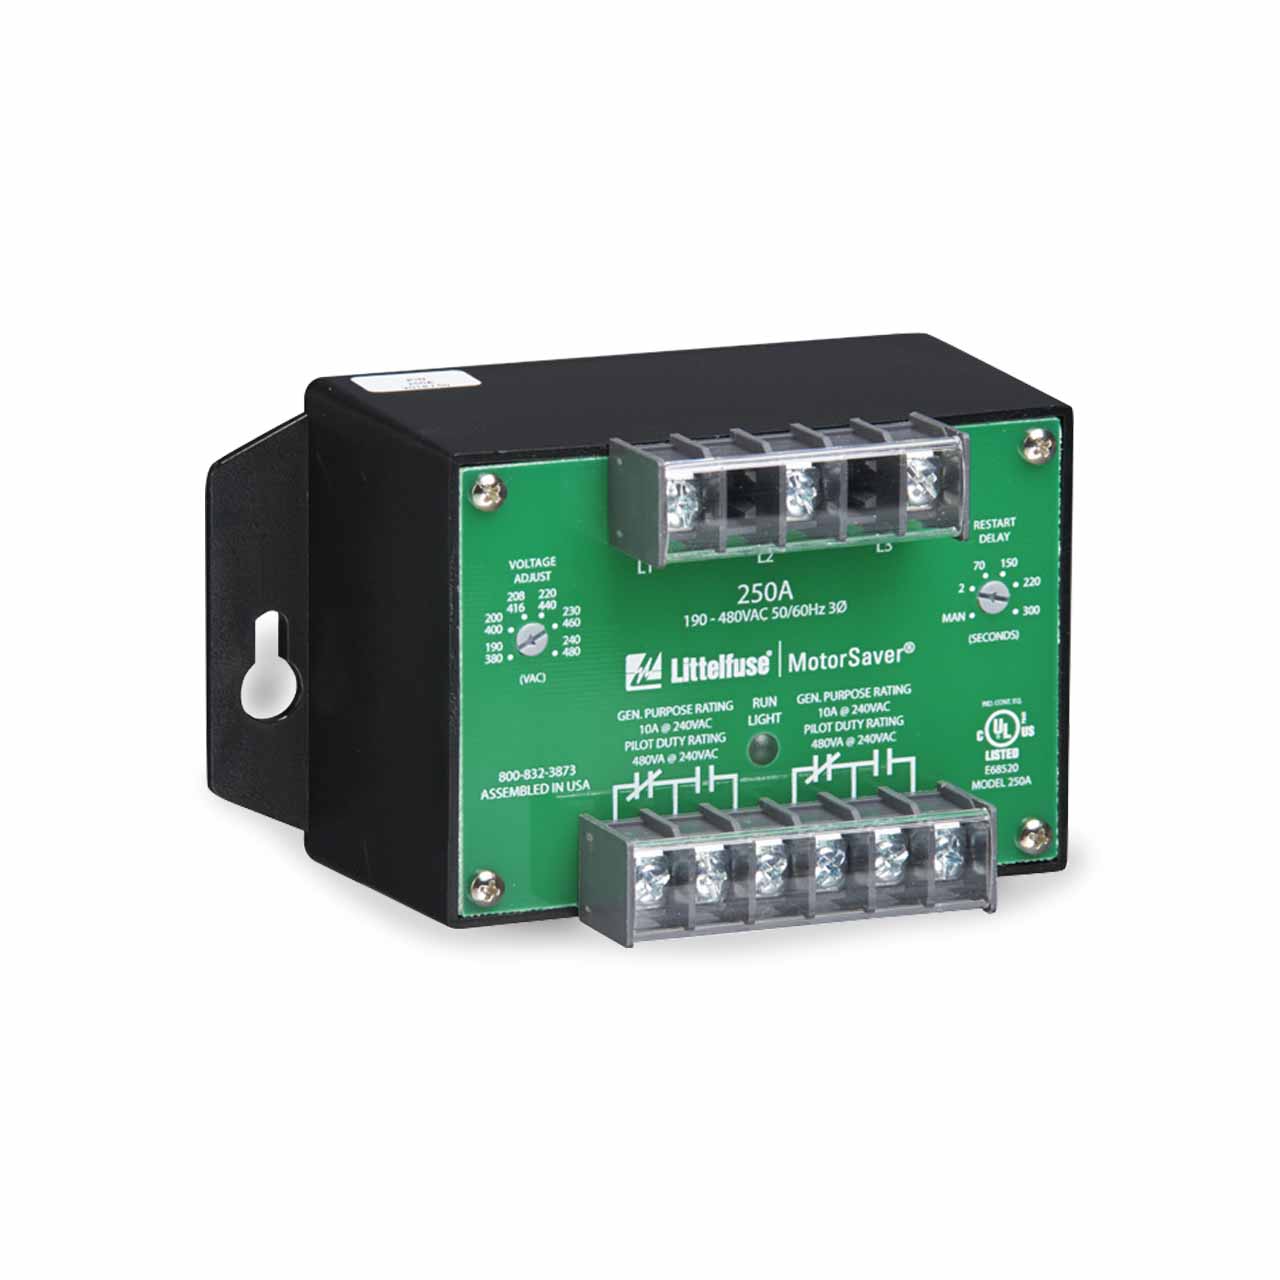 Littelfuse 250A-MET Three-Phase Voltage Monitor (Replaces META)